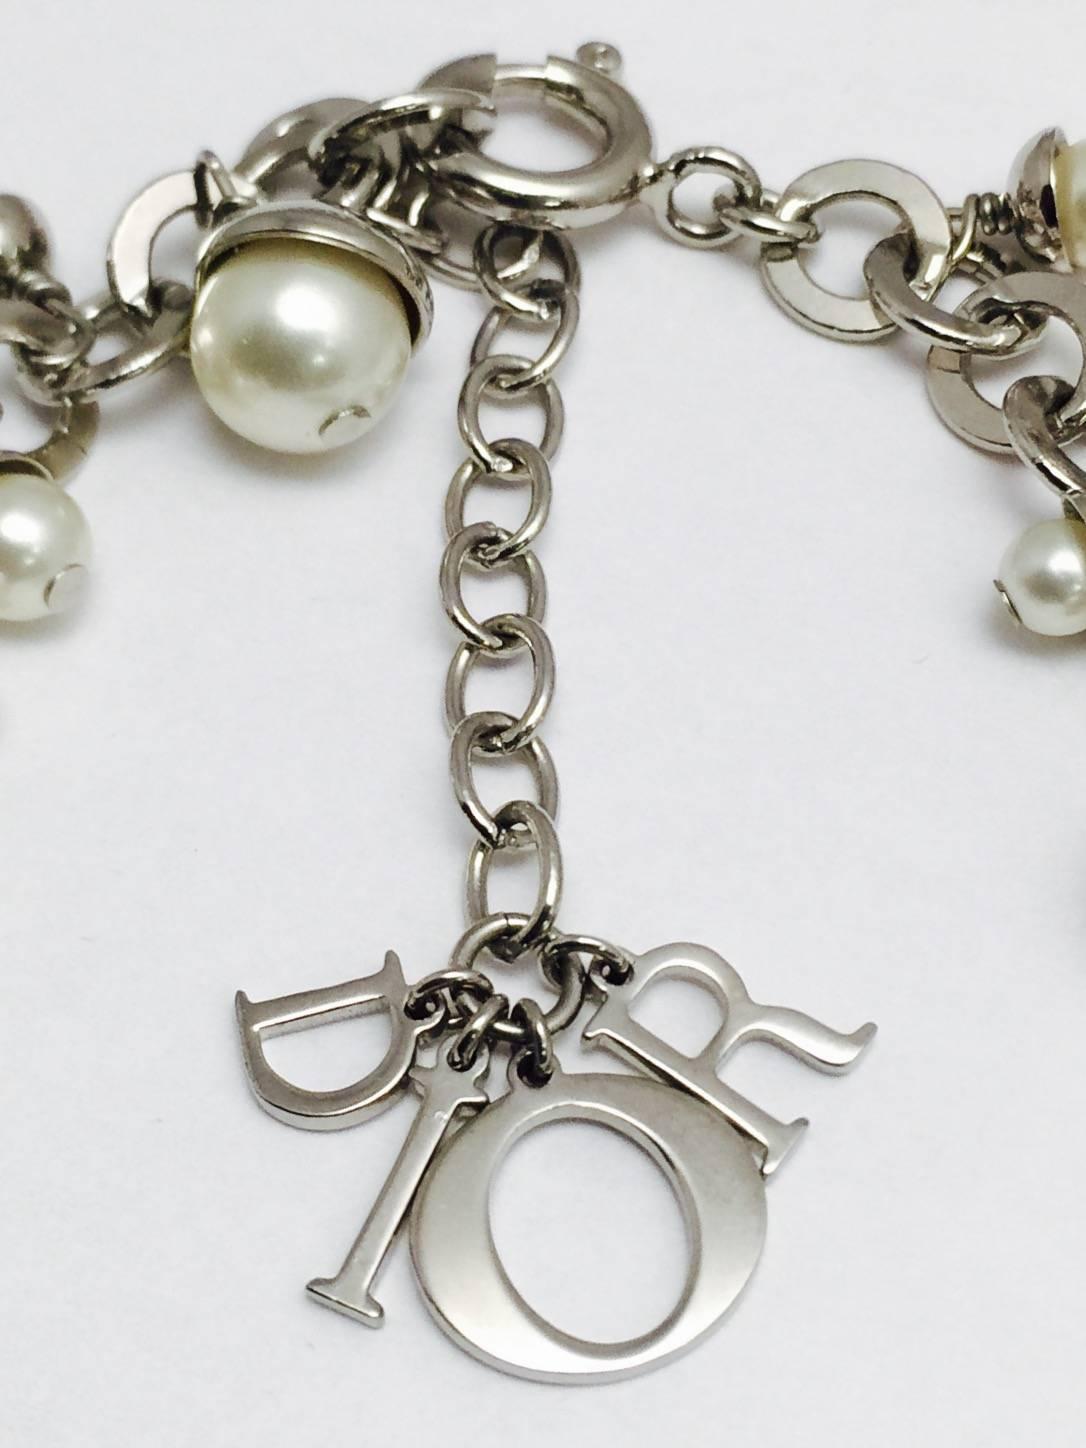 Dior is known for high style!  This incredible necklace features end capped faux pearls ranging from 4mm to 8mm.  Each pearl dangles effortlessly from a silver tone open link necklace. End caps add sparkle and drama.  The movement as you walk (or